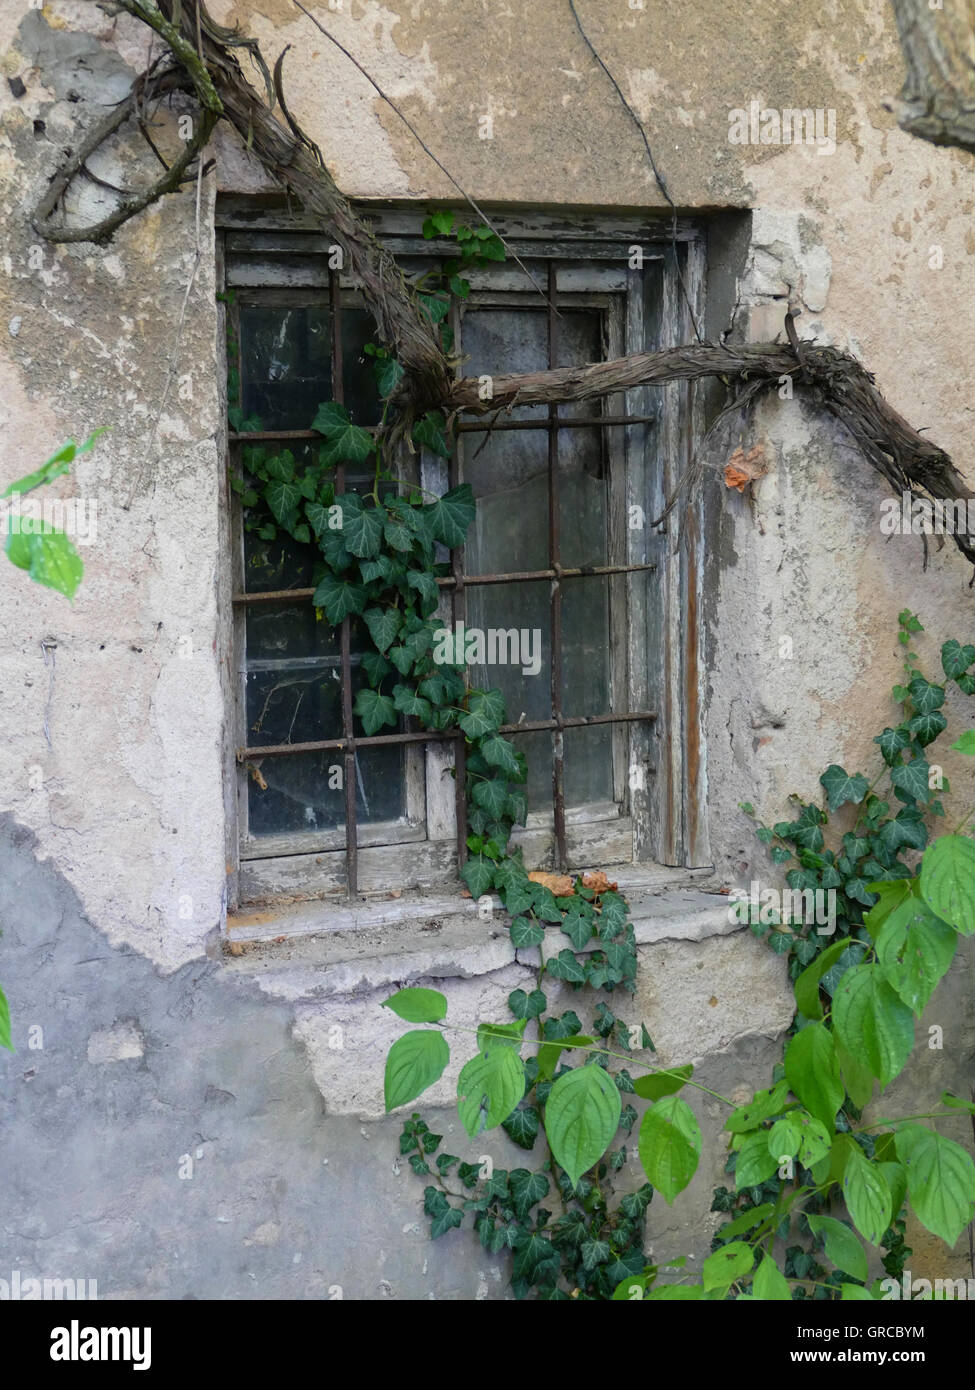 Barred Window In Old Walls Stock Photo